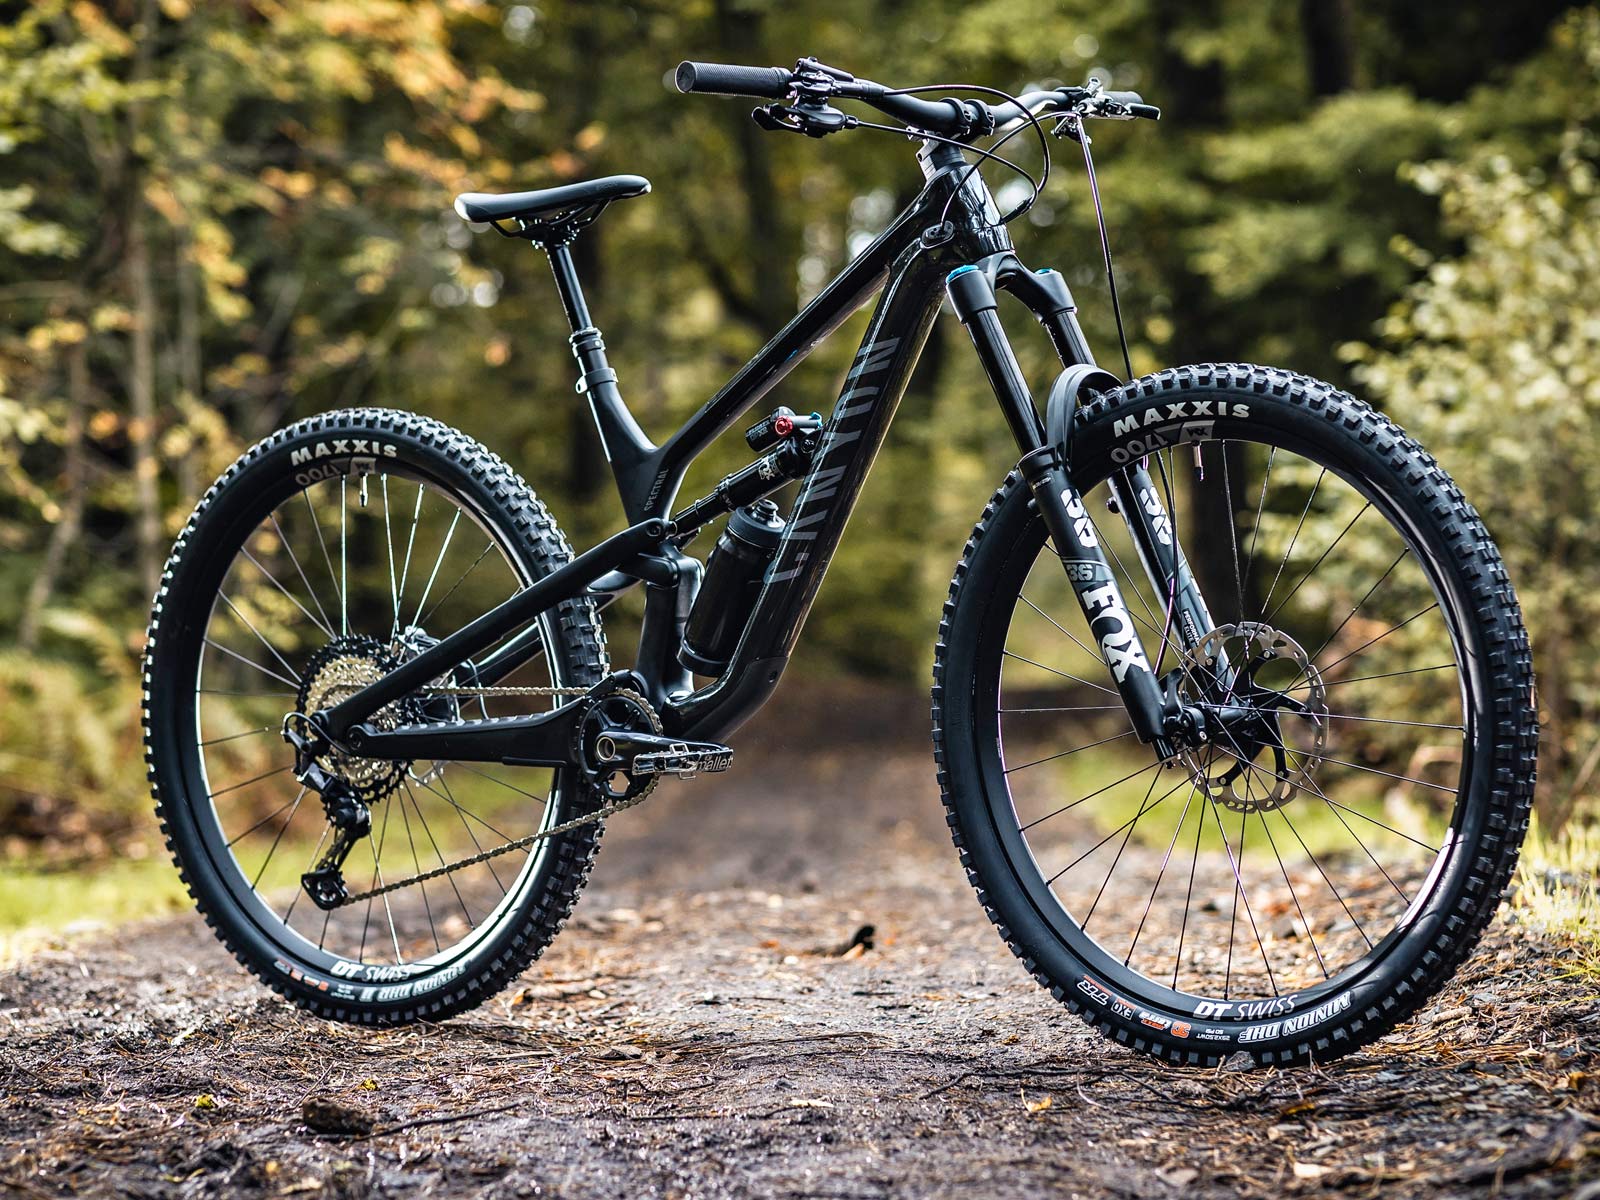 2021 Canyon Spectral 29 CF trail bike, lightweight carbon 150mm all-mountain bike, photo by Roo Fowler, angled